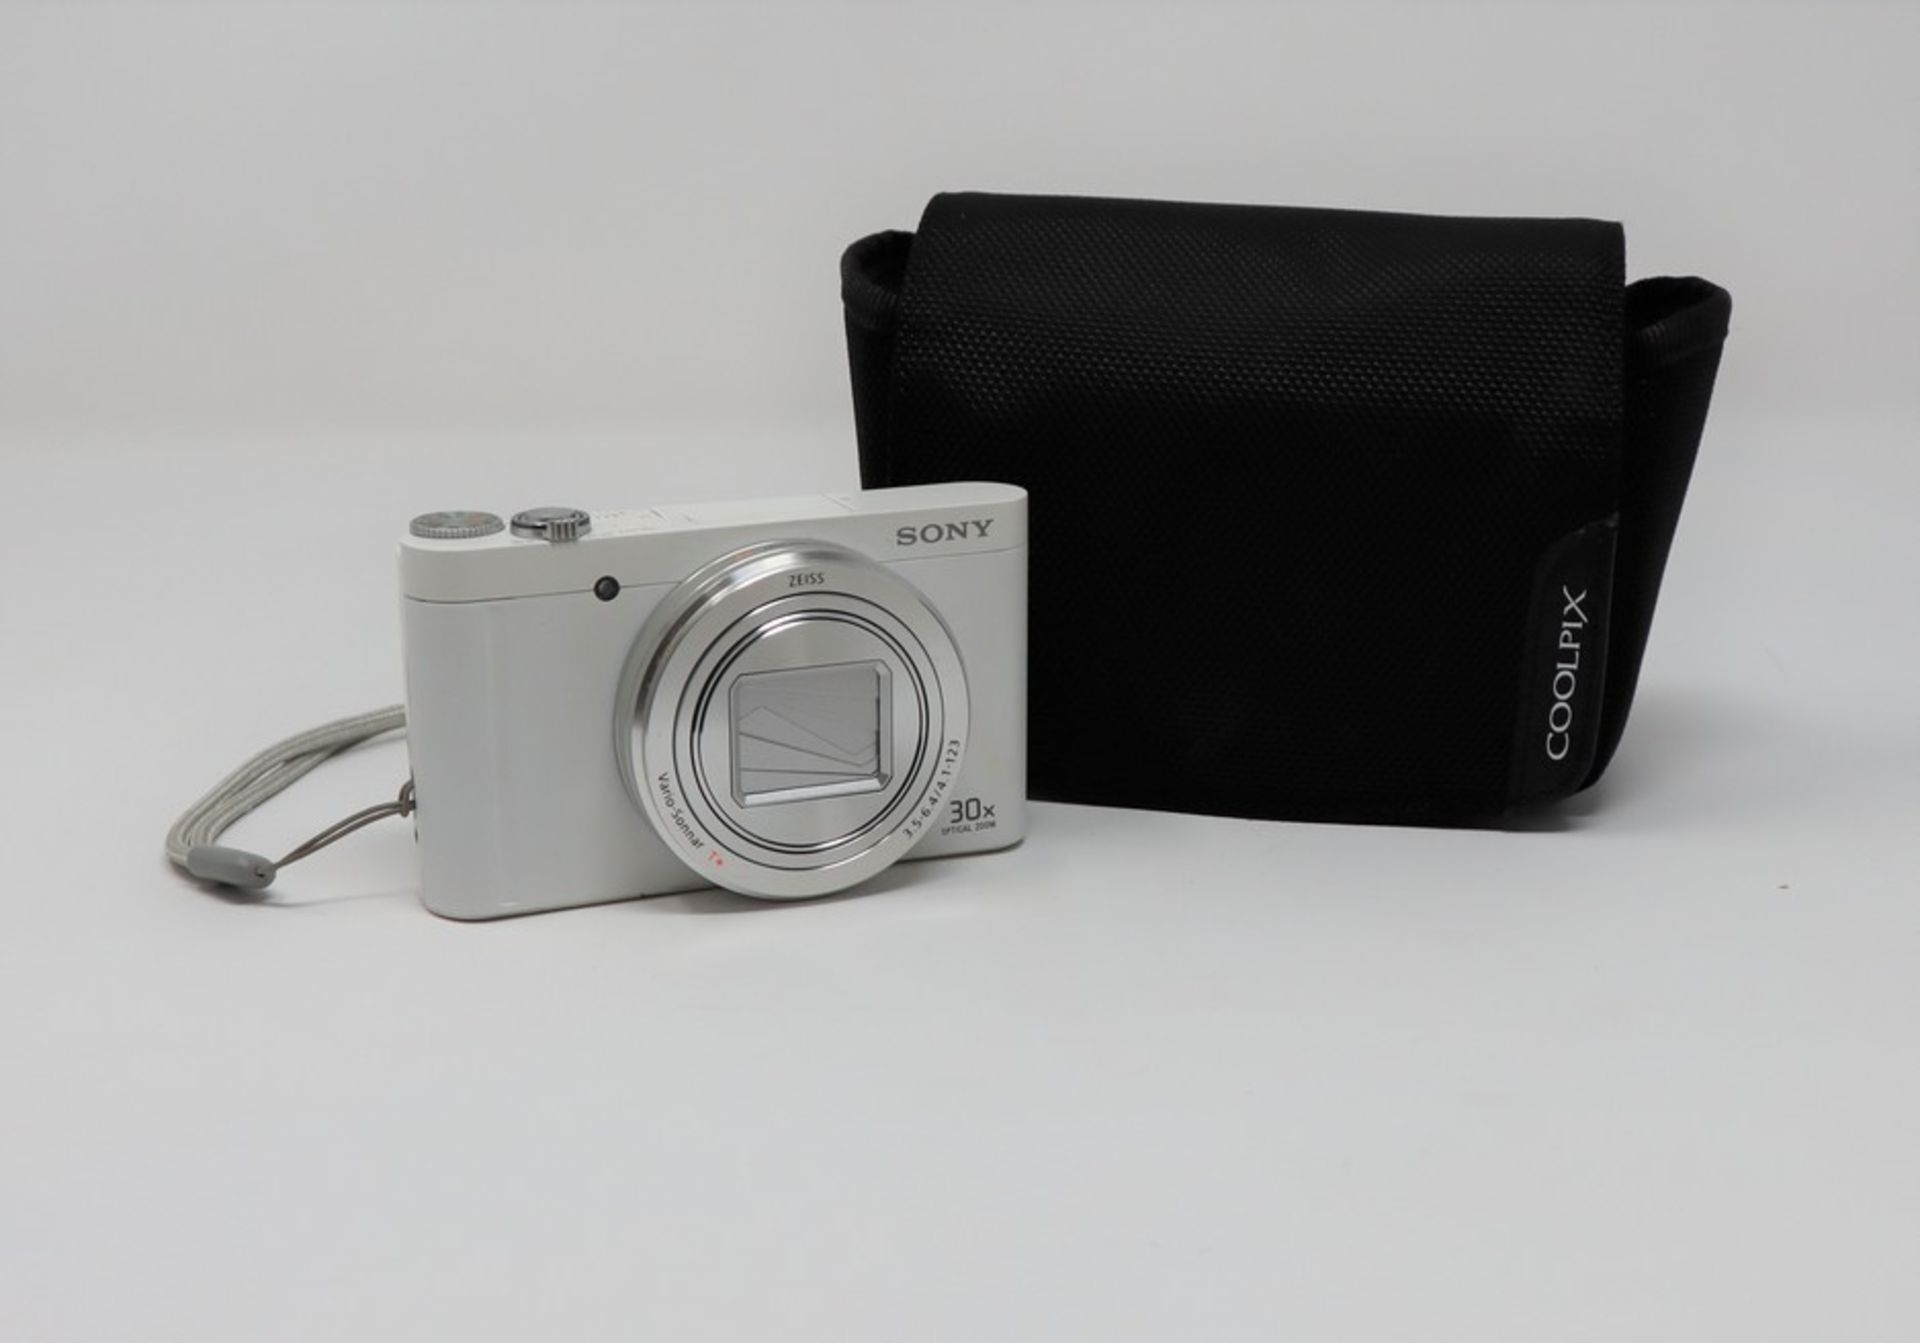 A pre-owned Sony Cyber-shot DSC WX500 Digital Camera in White with a Sony NP-BX1 battery, a